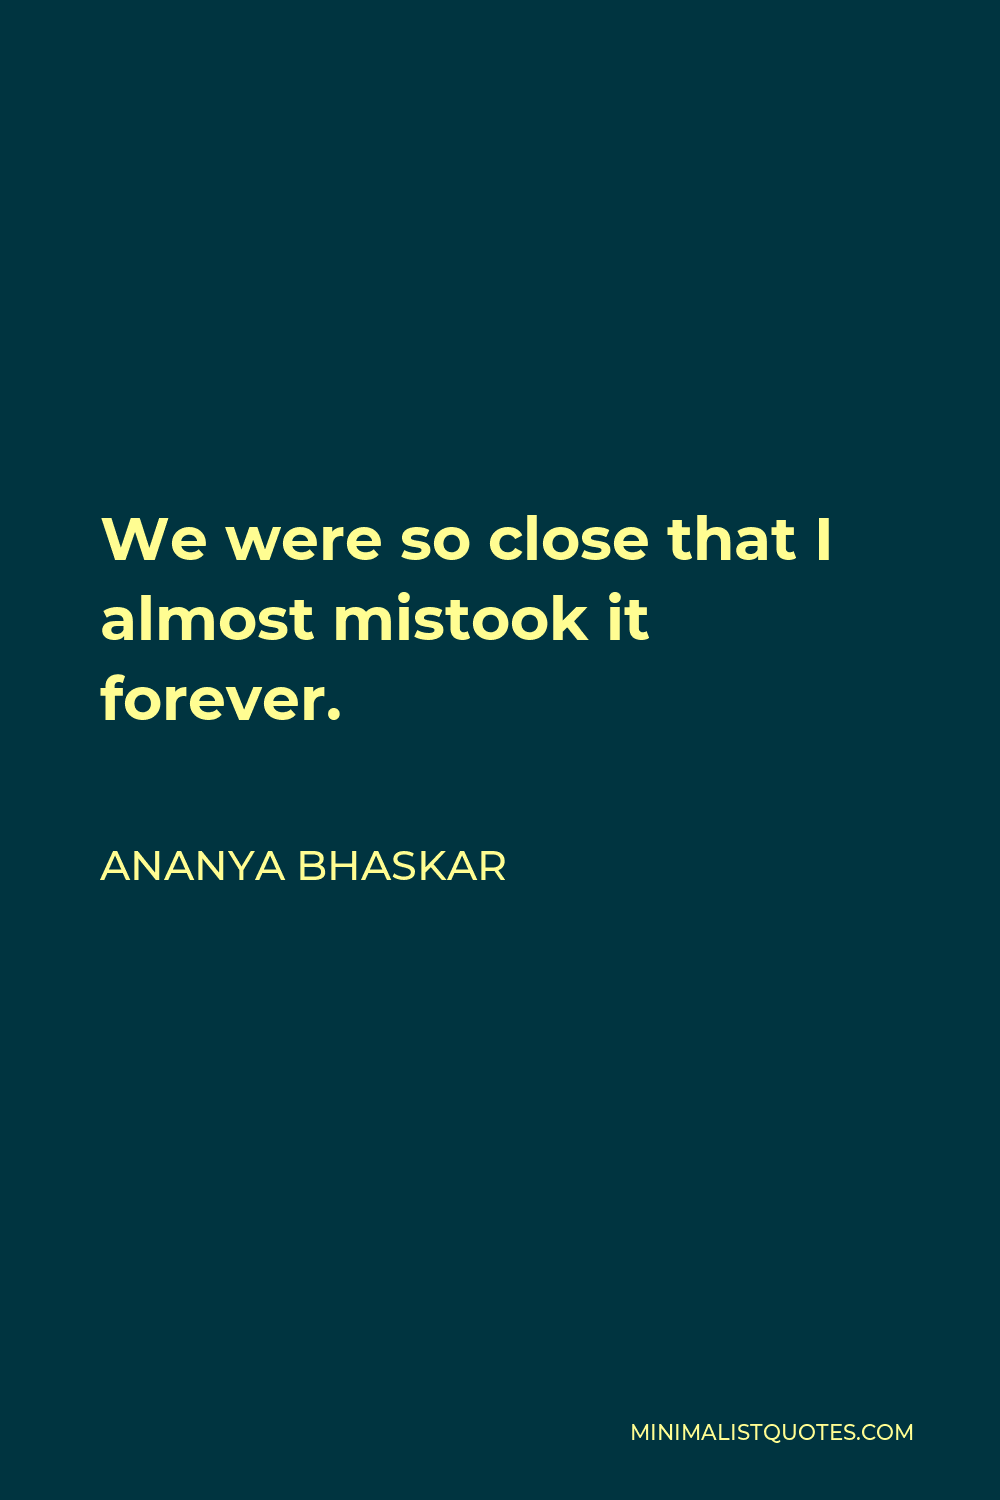 Ananya Bhaskar Quote - We were so close that I almost mistook it forever.